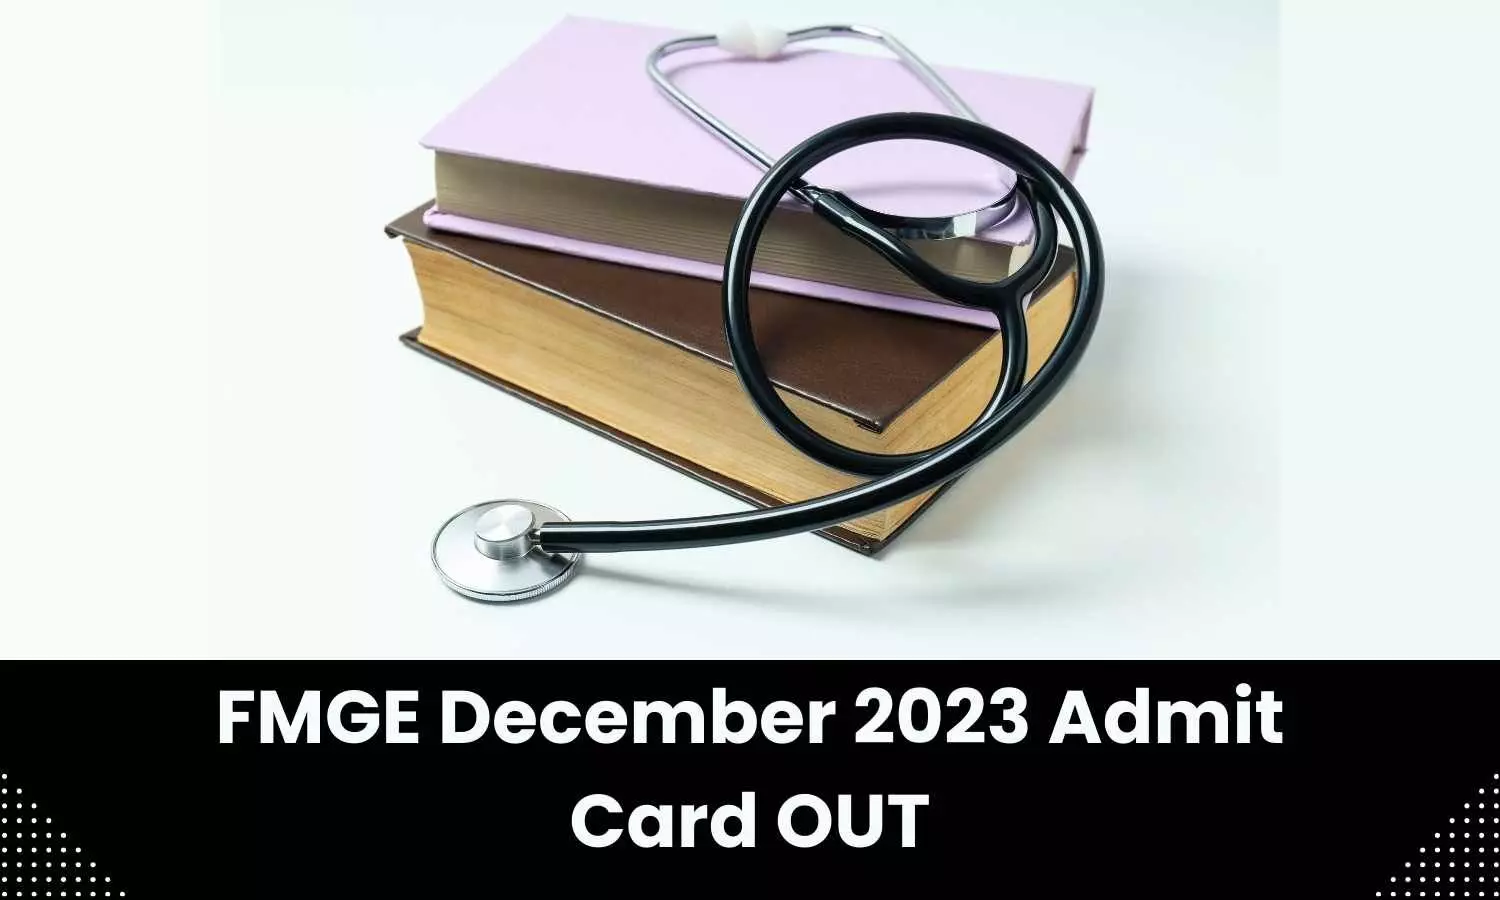 Admit card for FMGE December 2023 to be released on 15th January